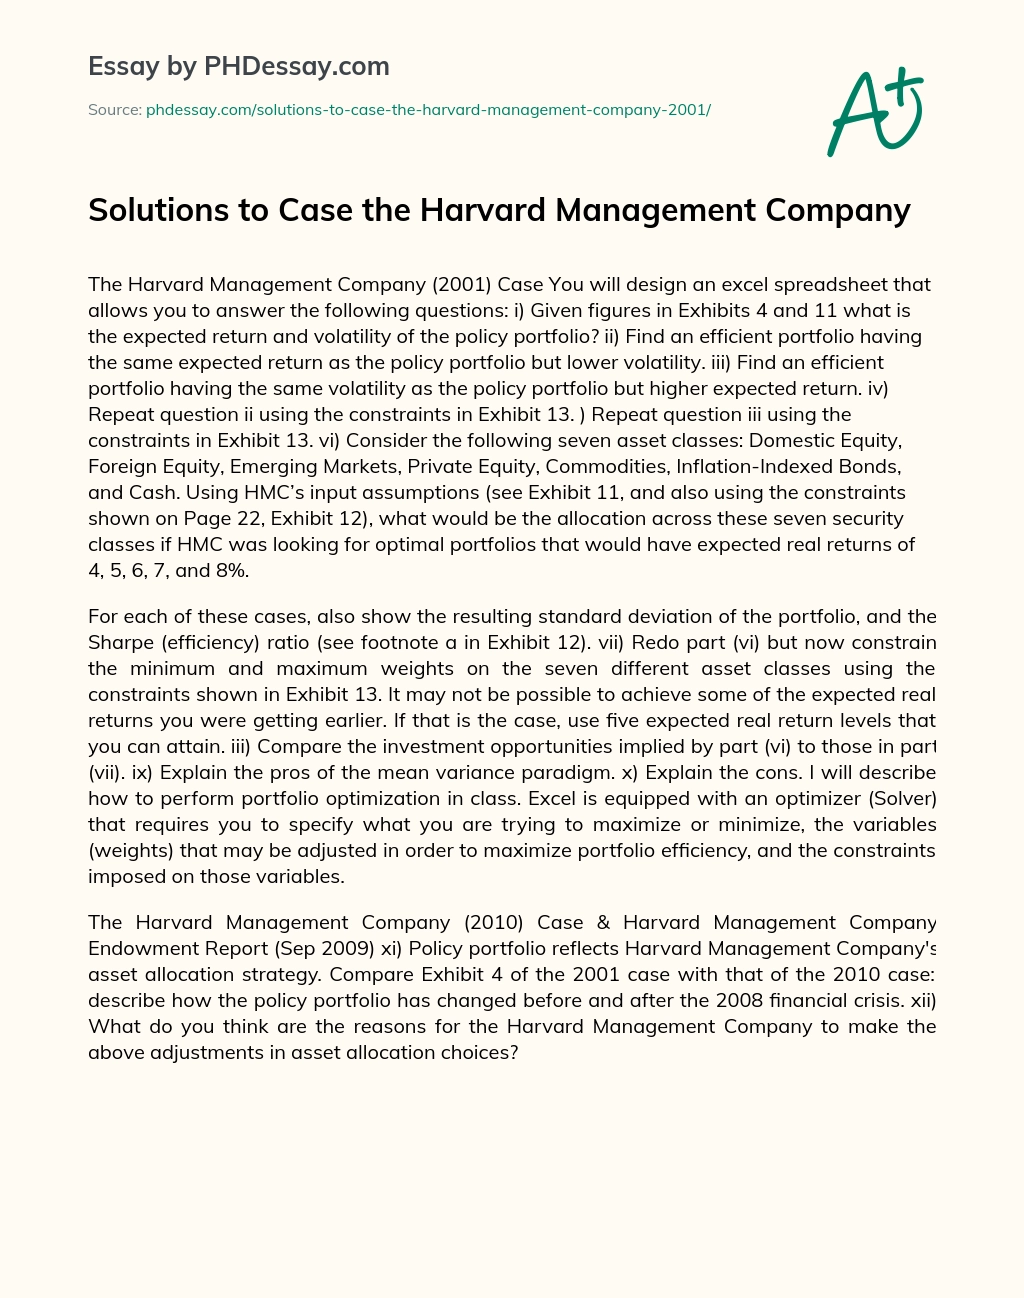 Solutions to Case the Harvard Management Company essay